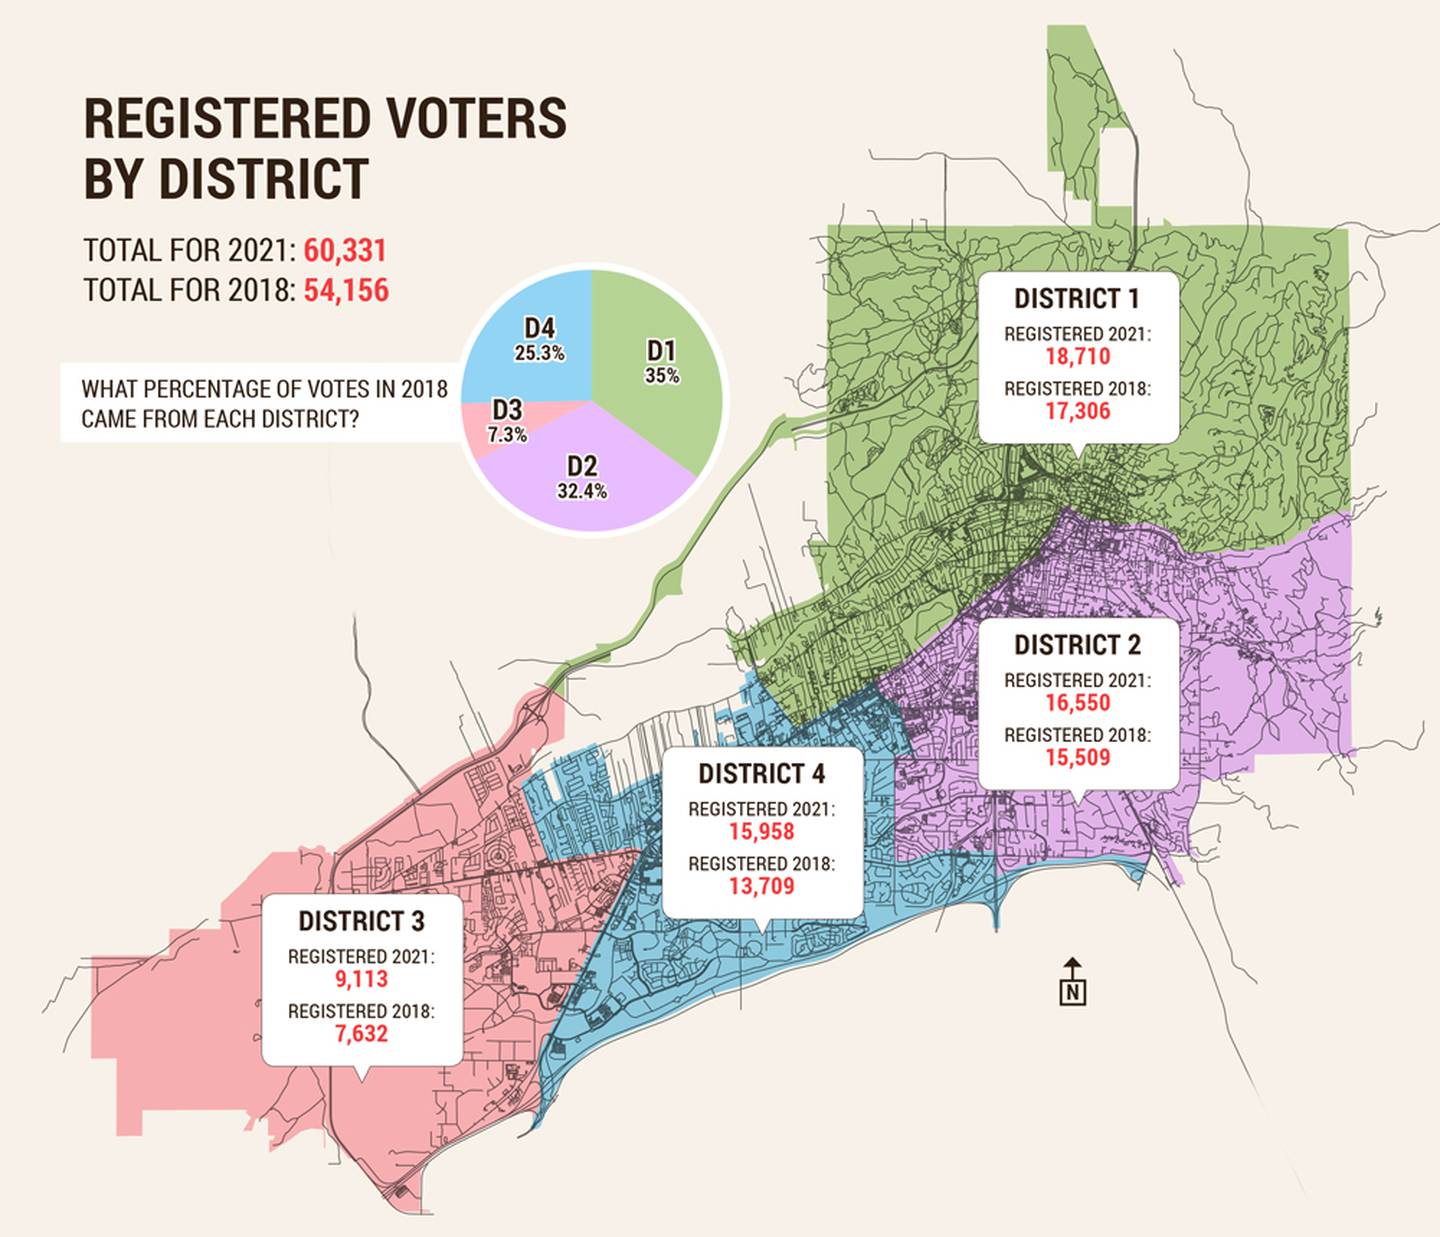 Registered Voters by District
Total for 2021: 60,331
TotaL for 2018: 54,156

District 1
Registered 2021: 18,710 
Registered 2018: 17,306

District 2
Registered 2021: 16,550 
Registered 2018: 15,509 

District 3
Registered 2021: 9,113
Registered 2018: 7,632

District 4
Registered 2021: 15,958 
Registered 2018: 13,709